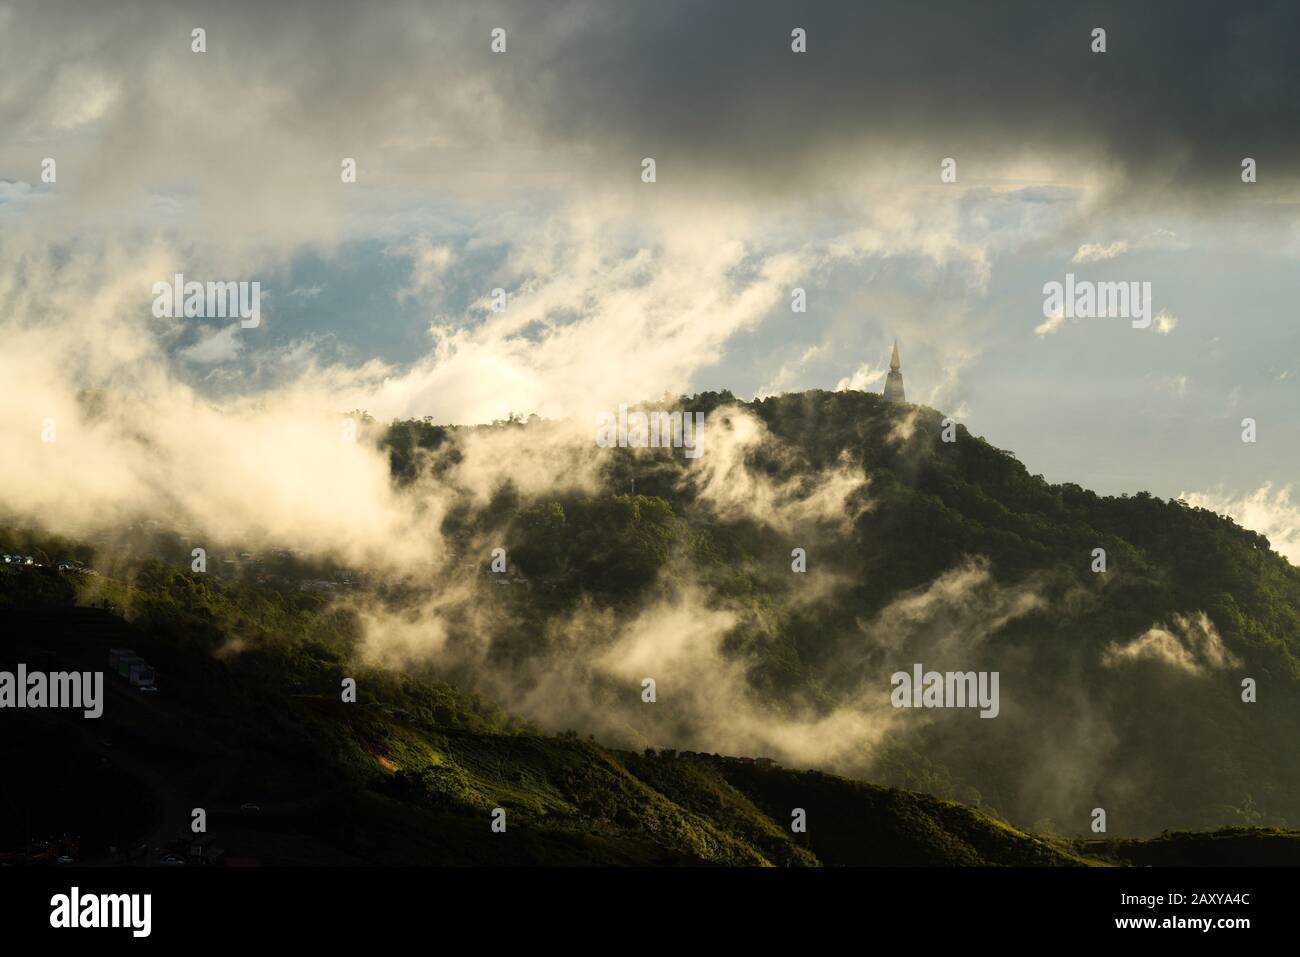 View of Wat Pa Phu Thap Boek from Phu Thap Boek mountain in the morning covered in clouds, Dan Sai district, Thailand Stock Photo